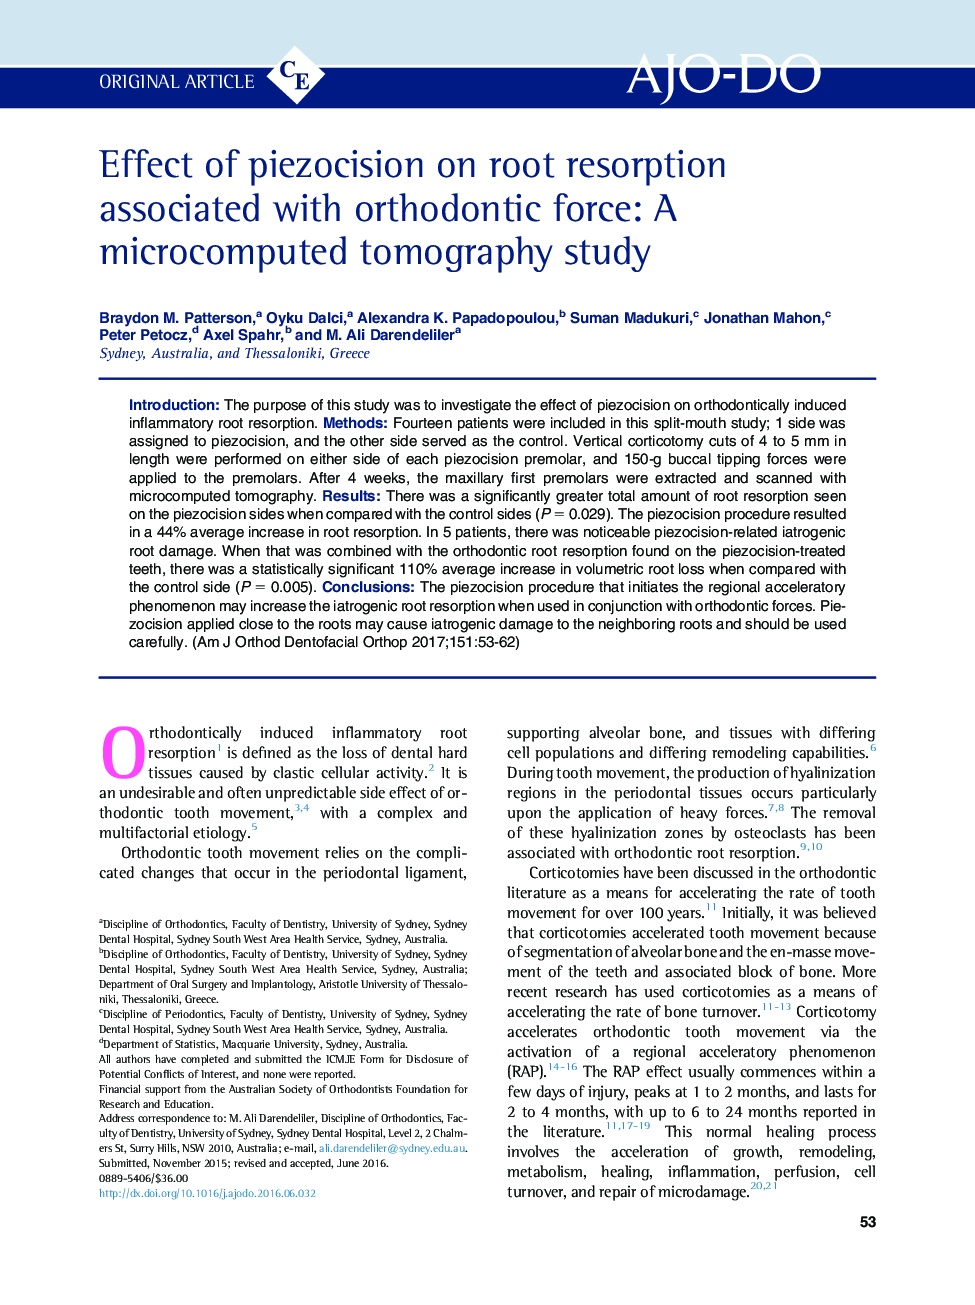 Effect of piezocision on root resorption associated with orthodontic force: A microcomputed tomography study